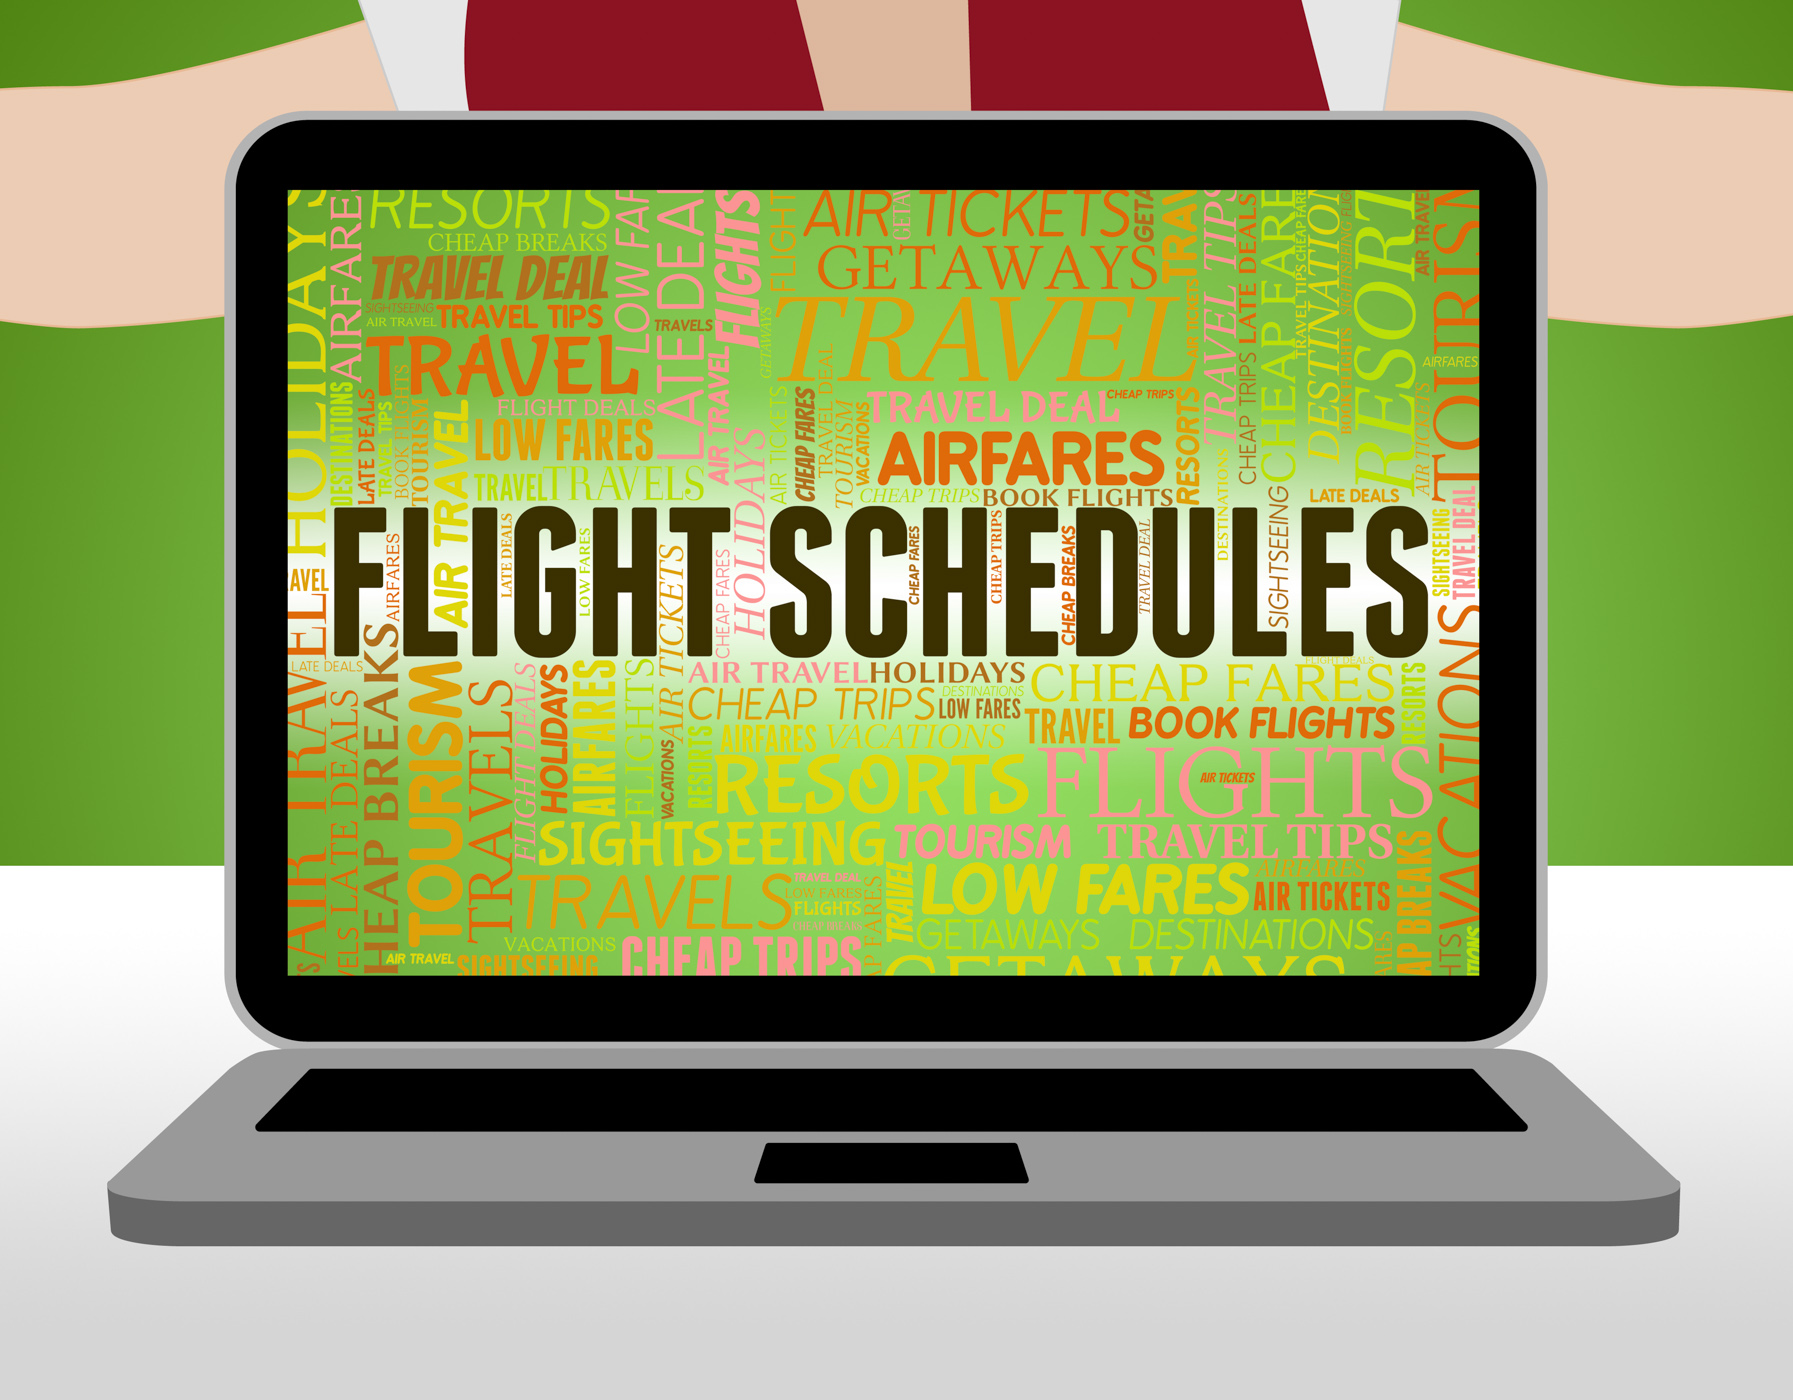 Flight schedules means flights info and airline photo